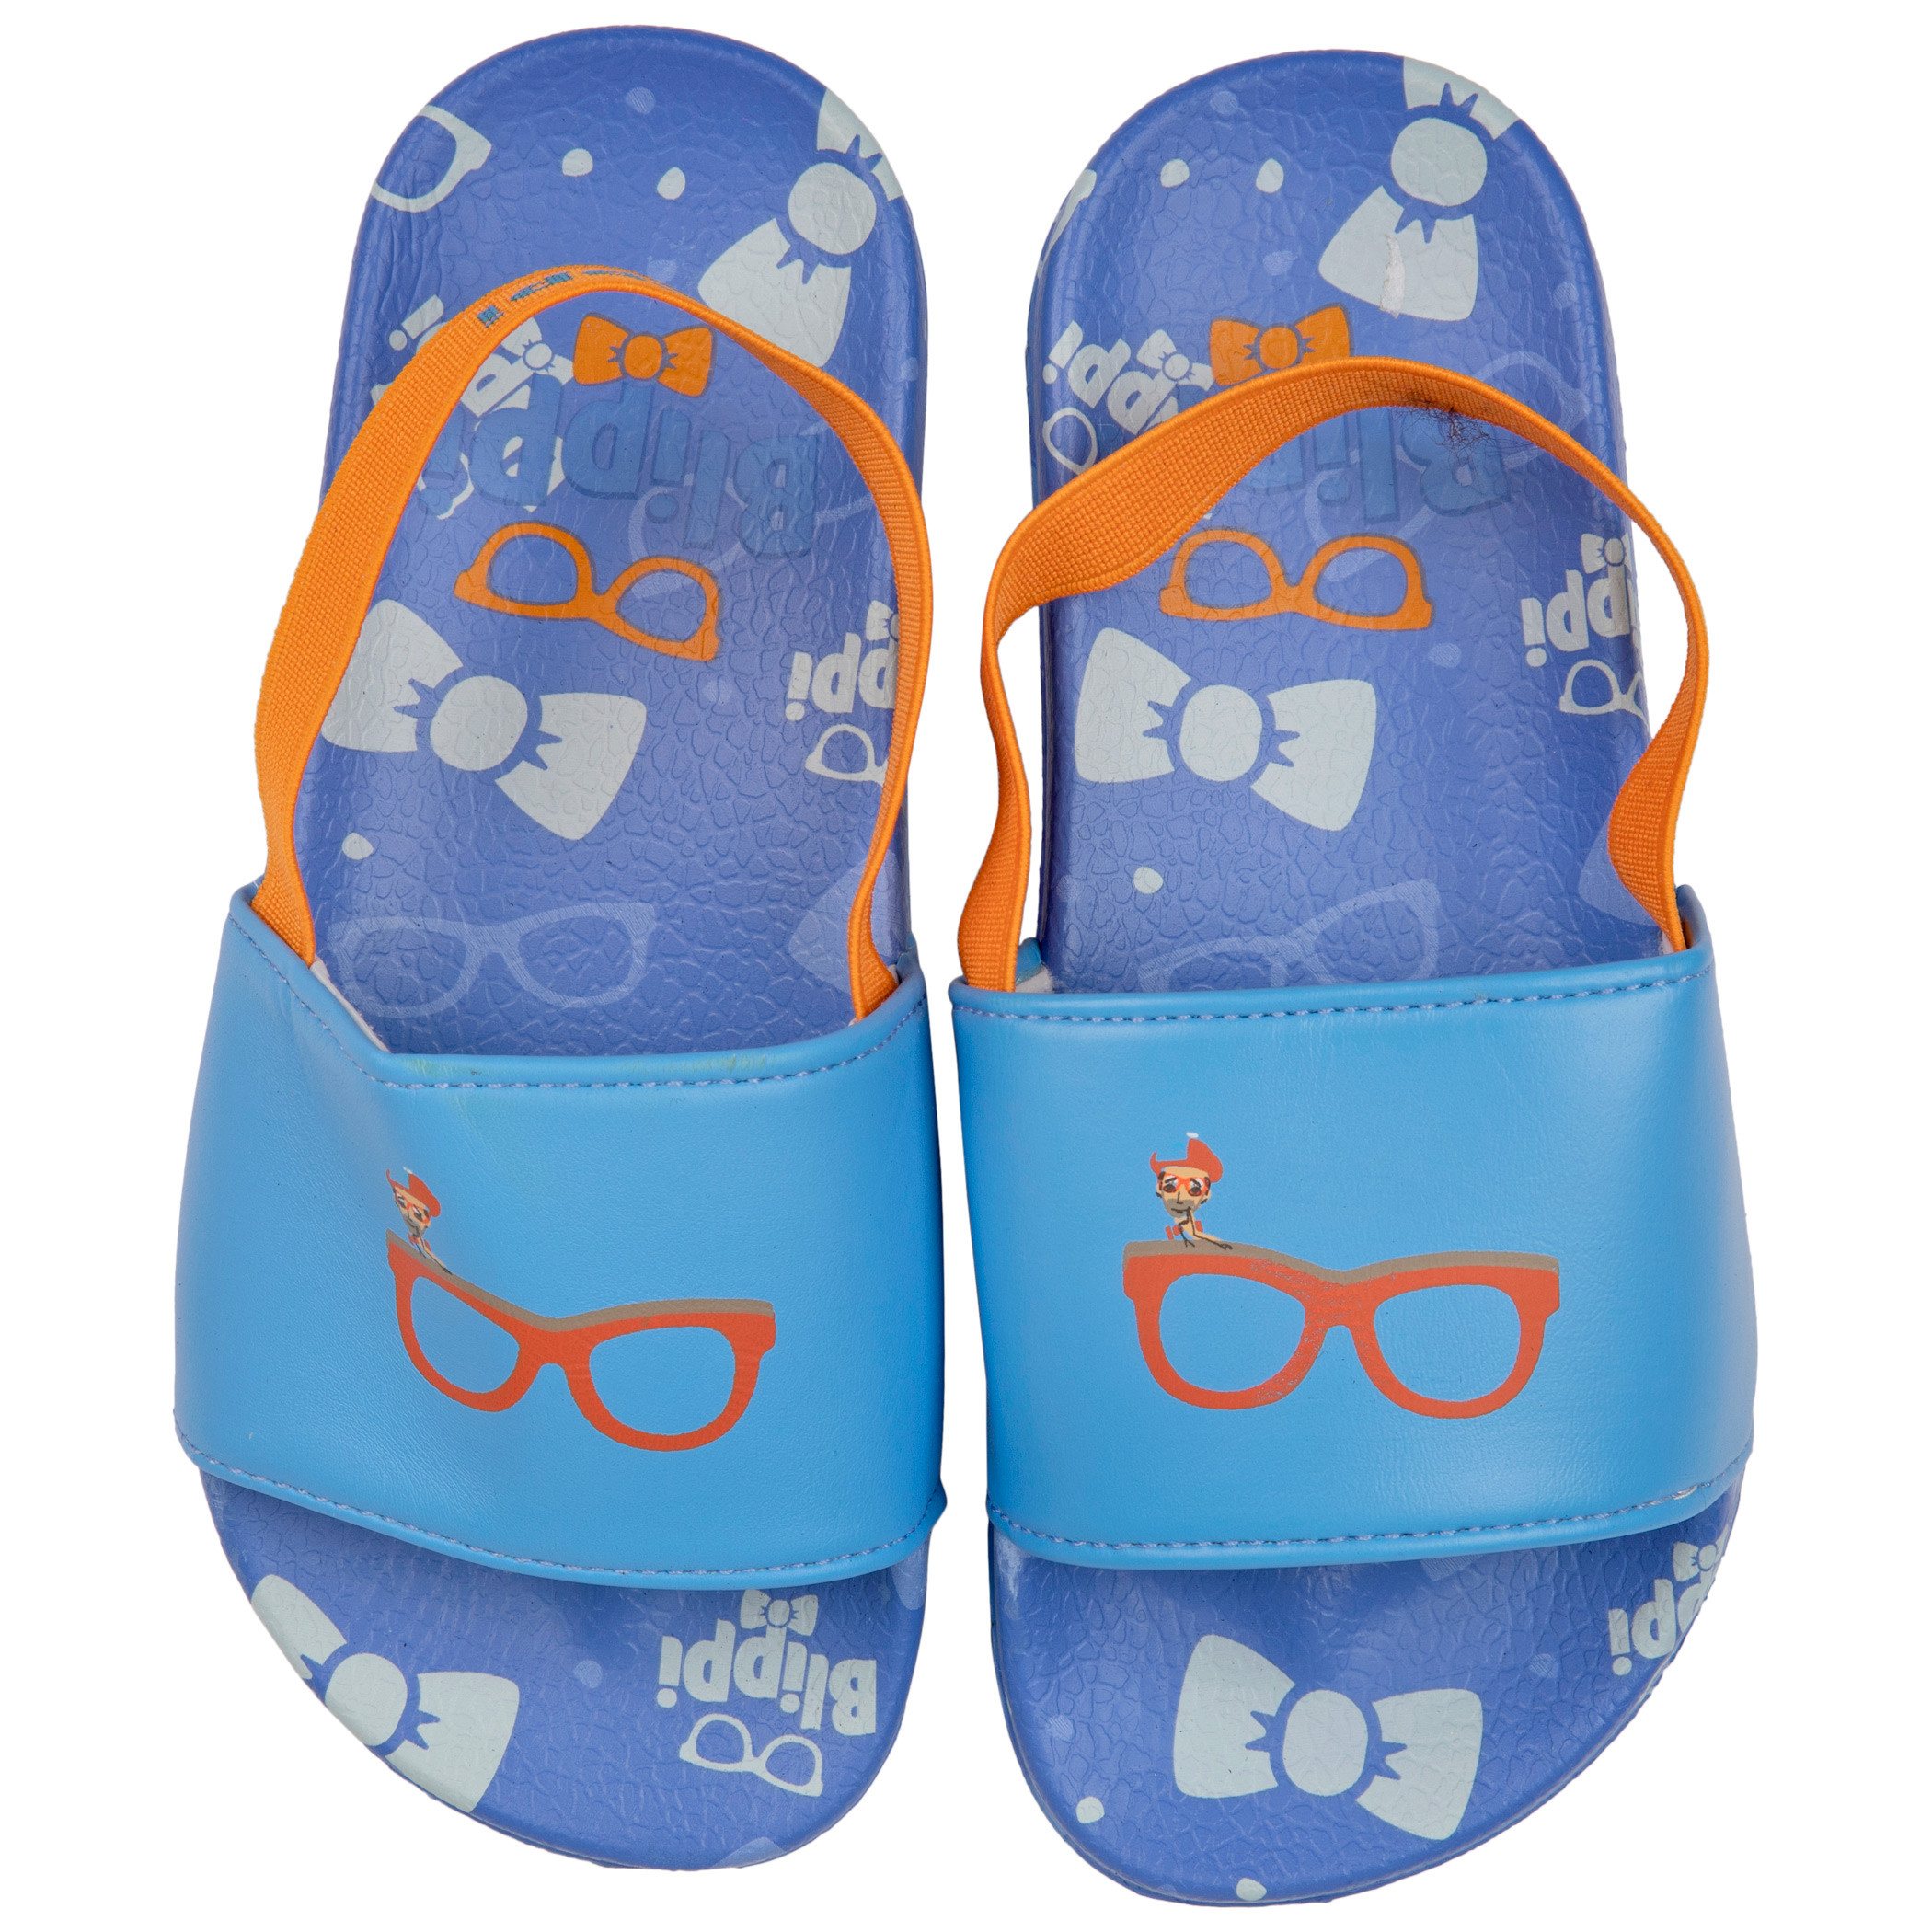 Blippi Character and Glasses Toddlers Sandals